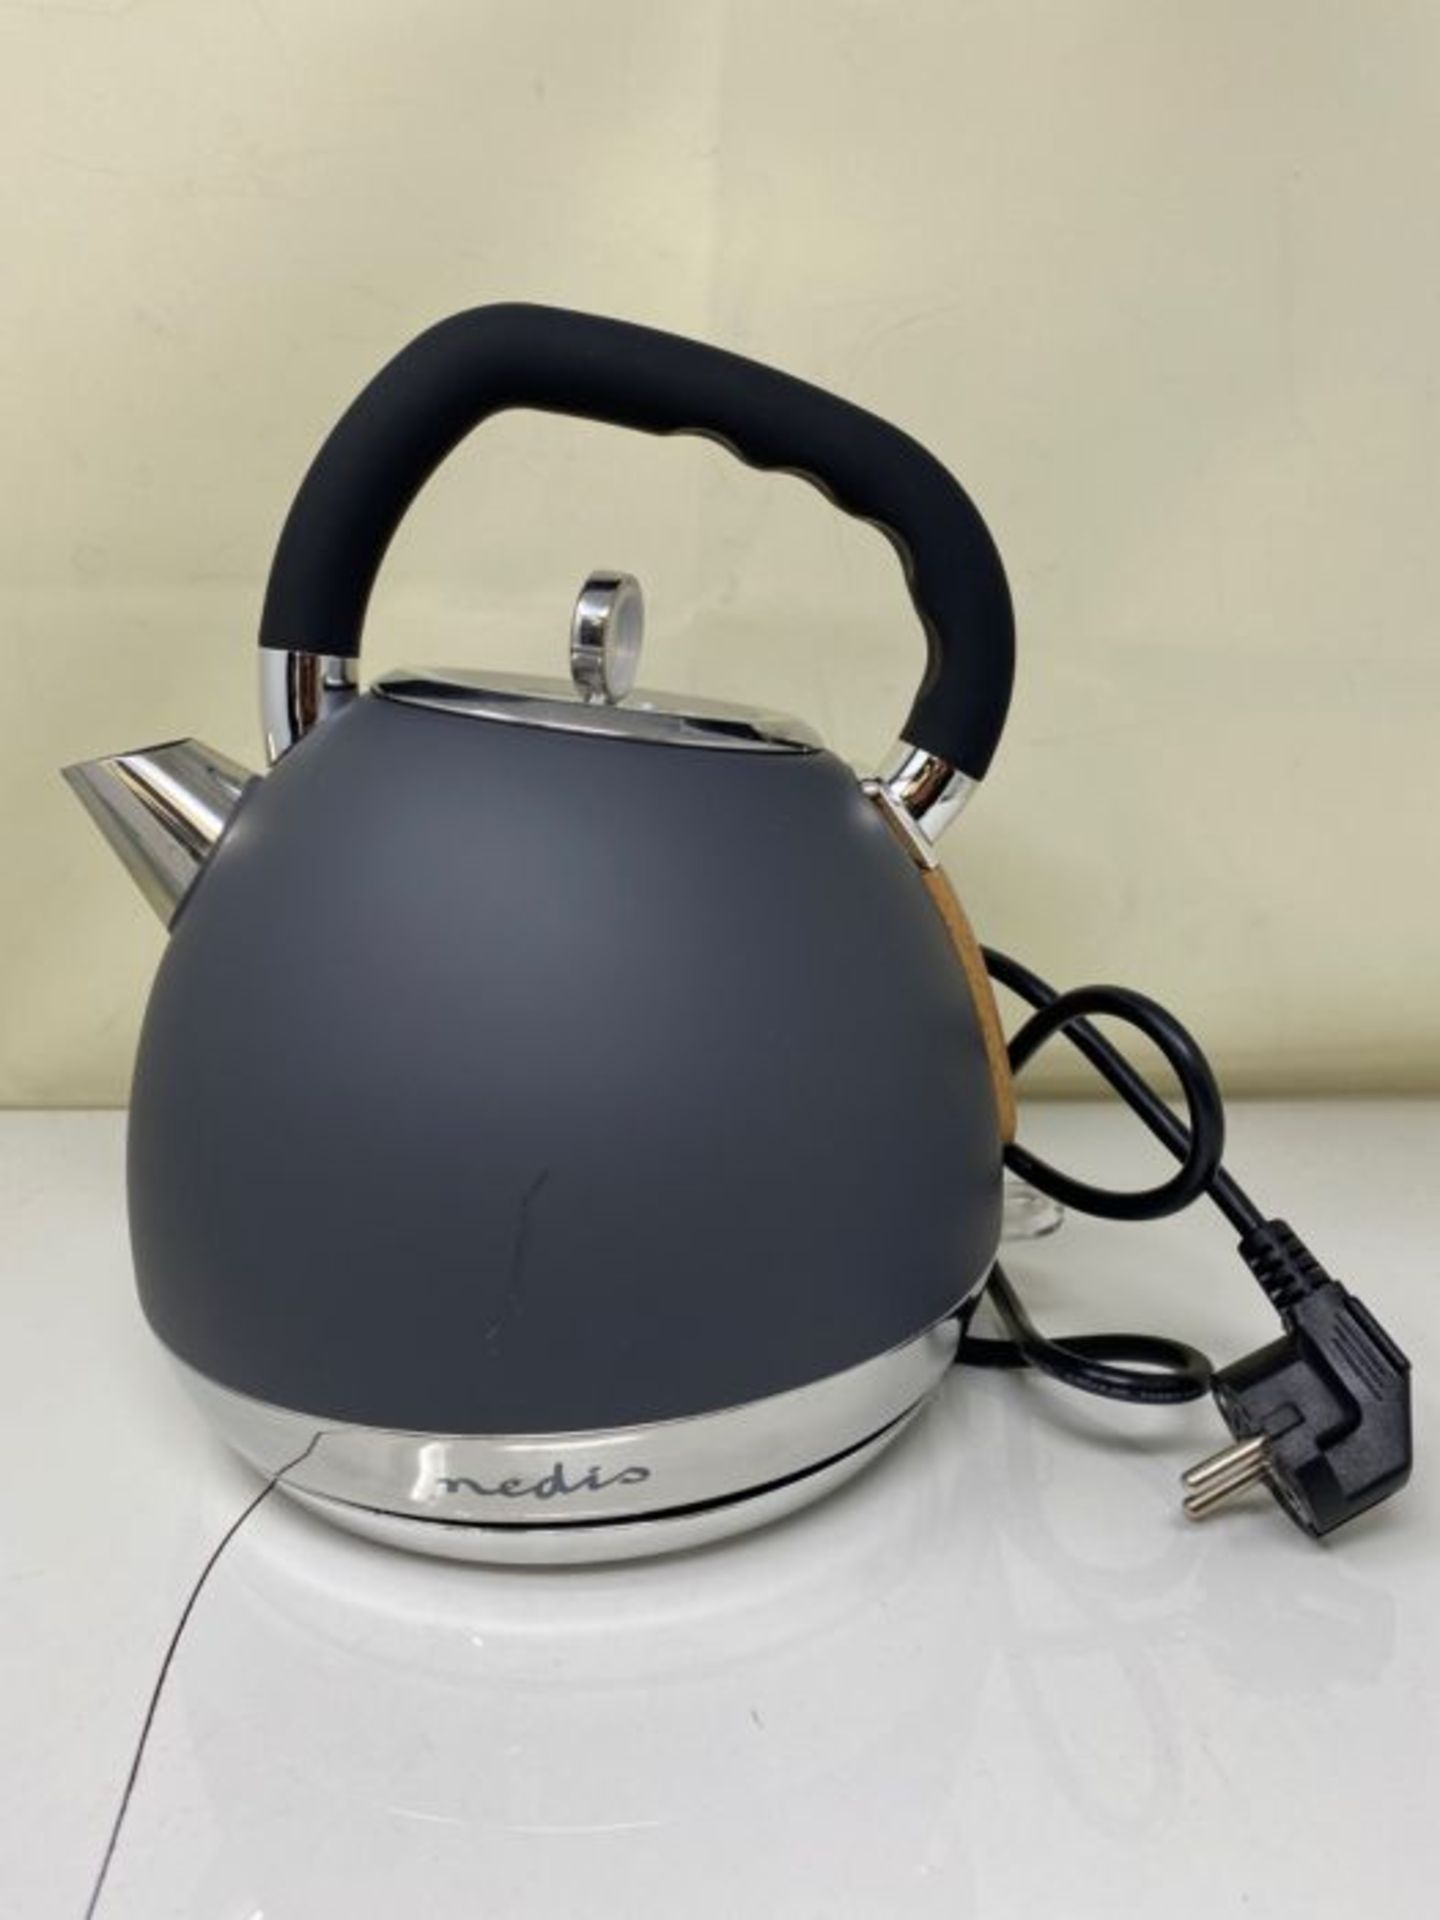 Nedis Electric Kettle, 1.8L, Soft, Grey - Image 3 of 3